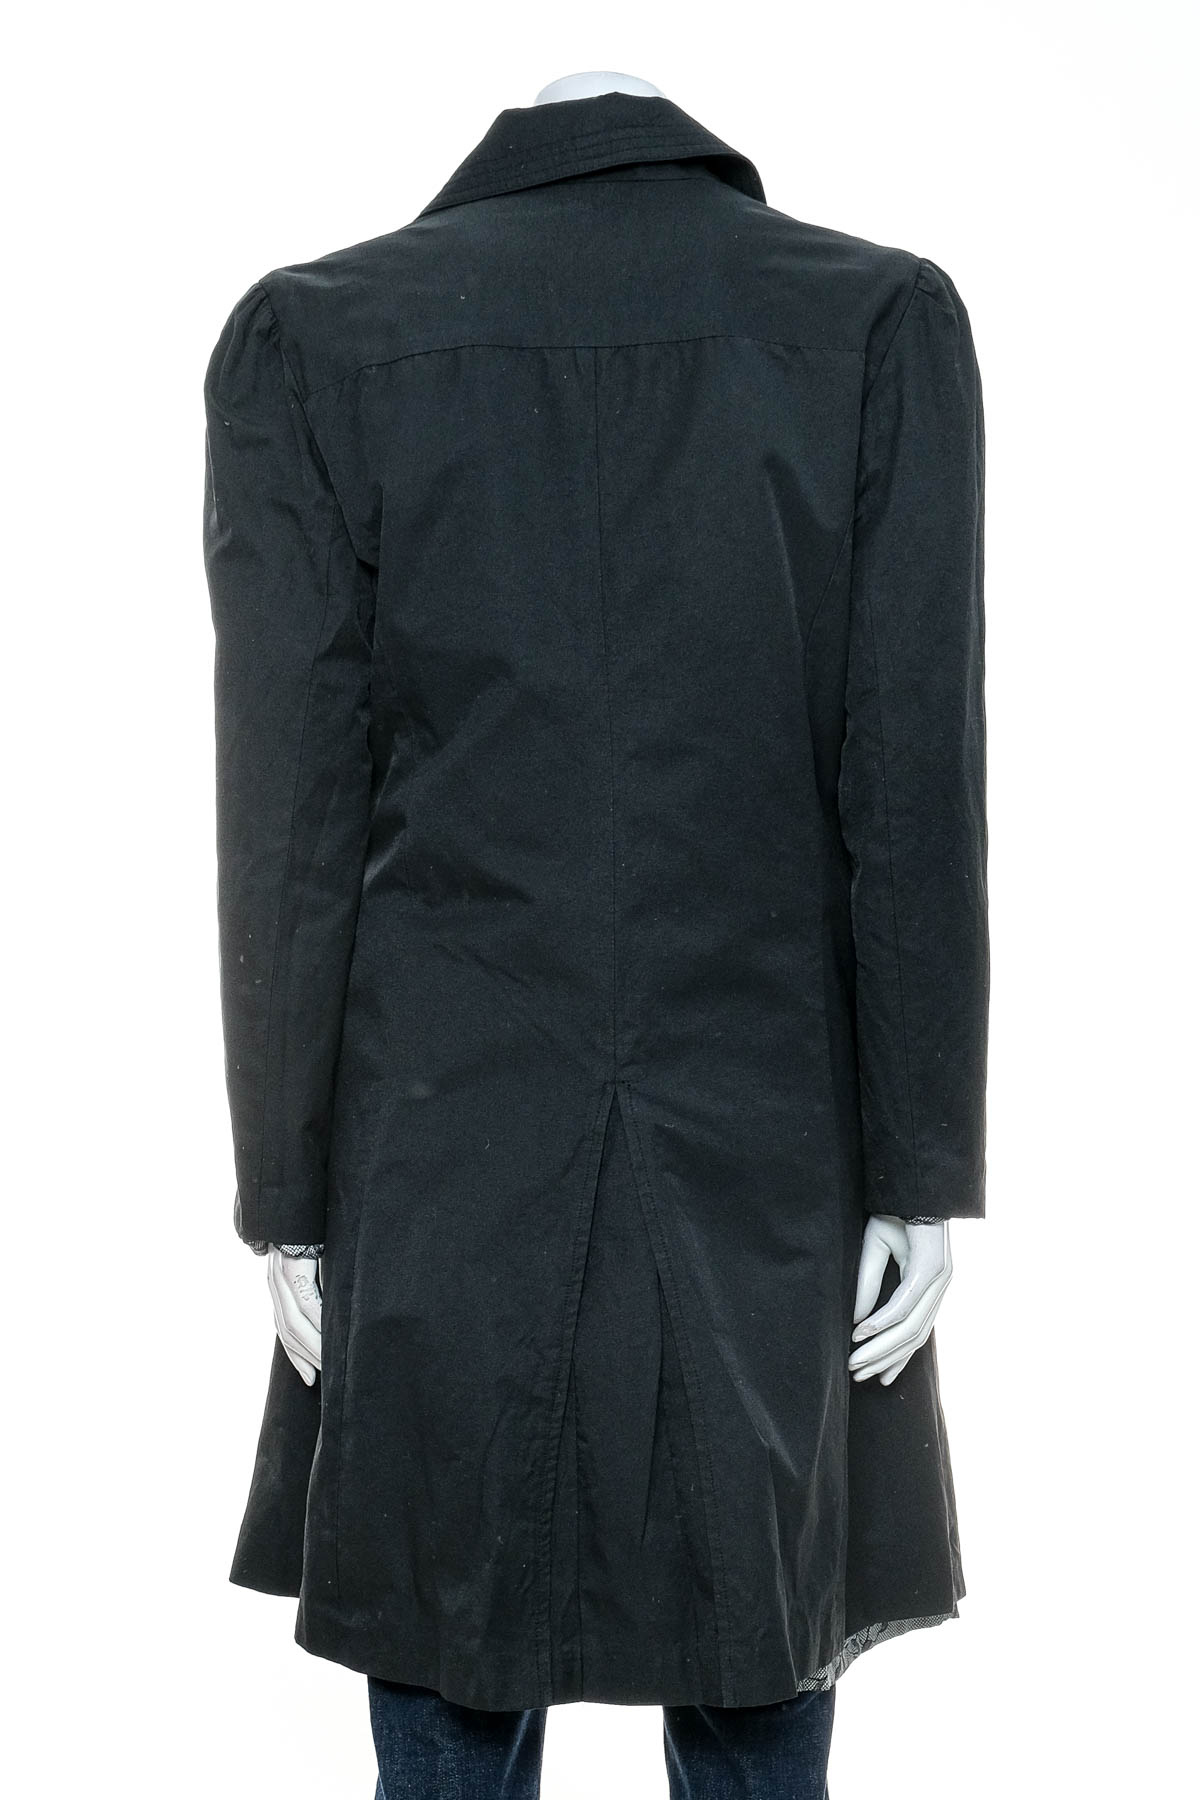 Ladies' Trench Coat - Behnaz Sarafpour for Target - 1